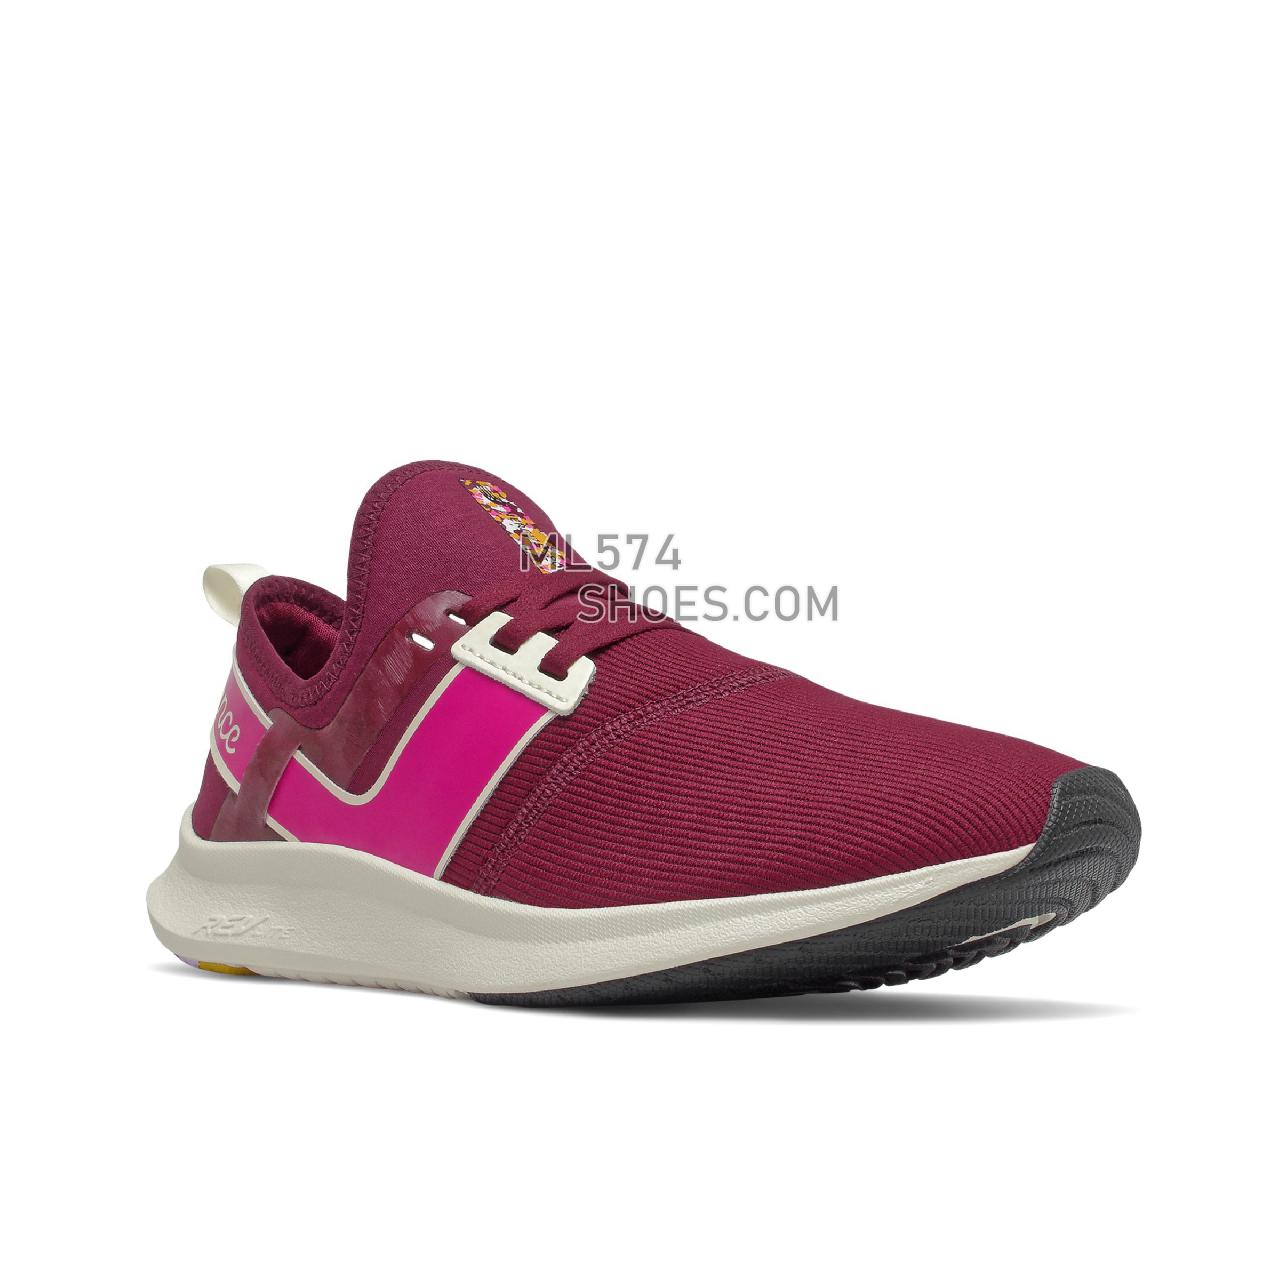 New Balance NB Nergize Sport - Women's Sport Style Sneakers - Garnet with Pink Glo - WNRGSPS1